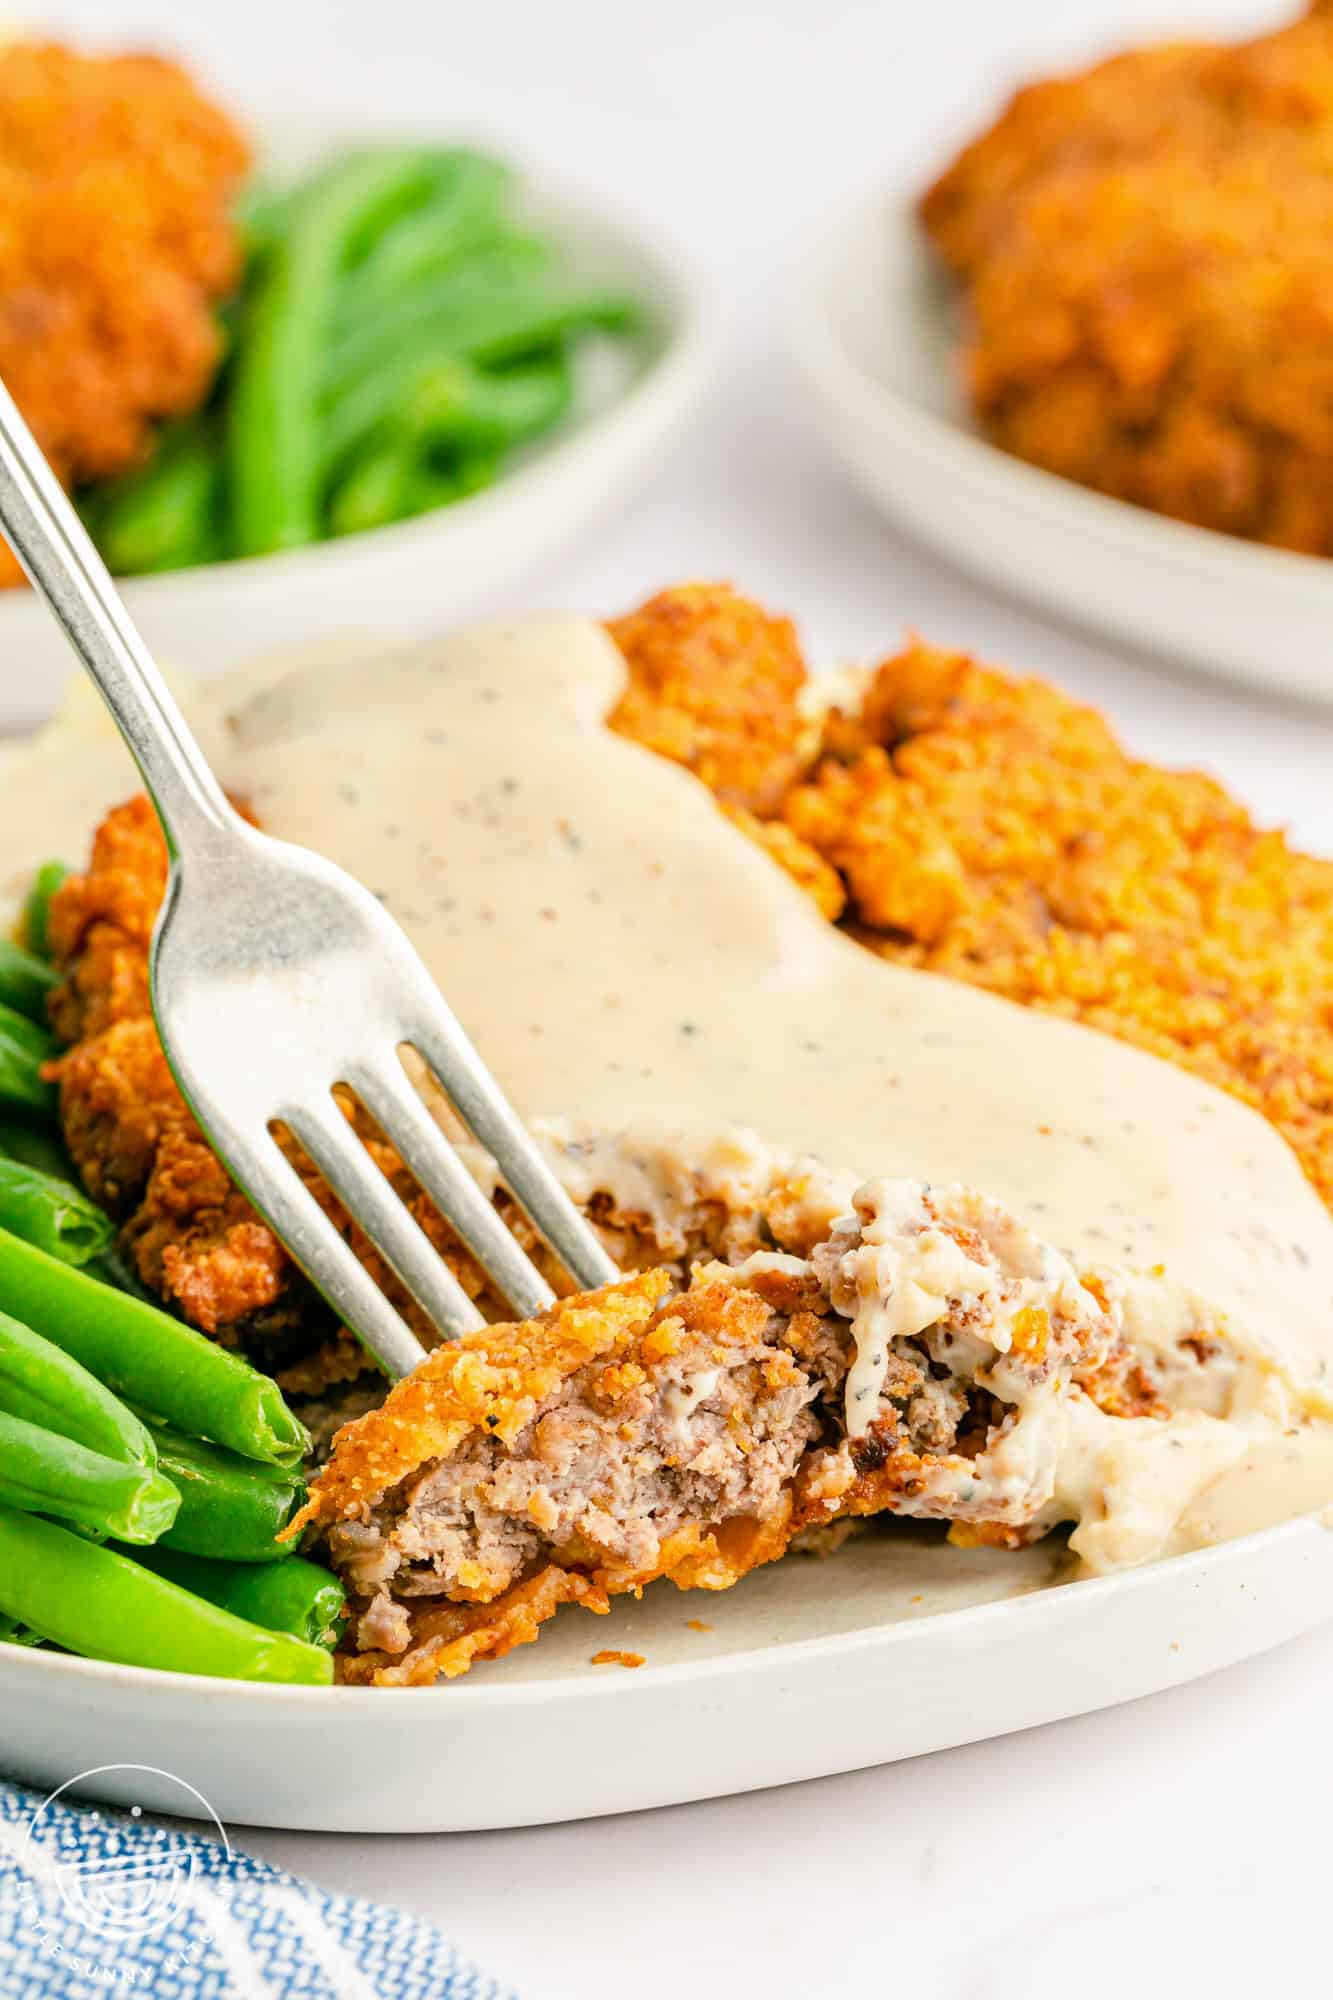 A bite shot of the chicken fried steak, with a fork and some gravy.